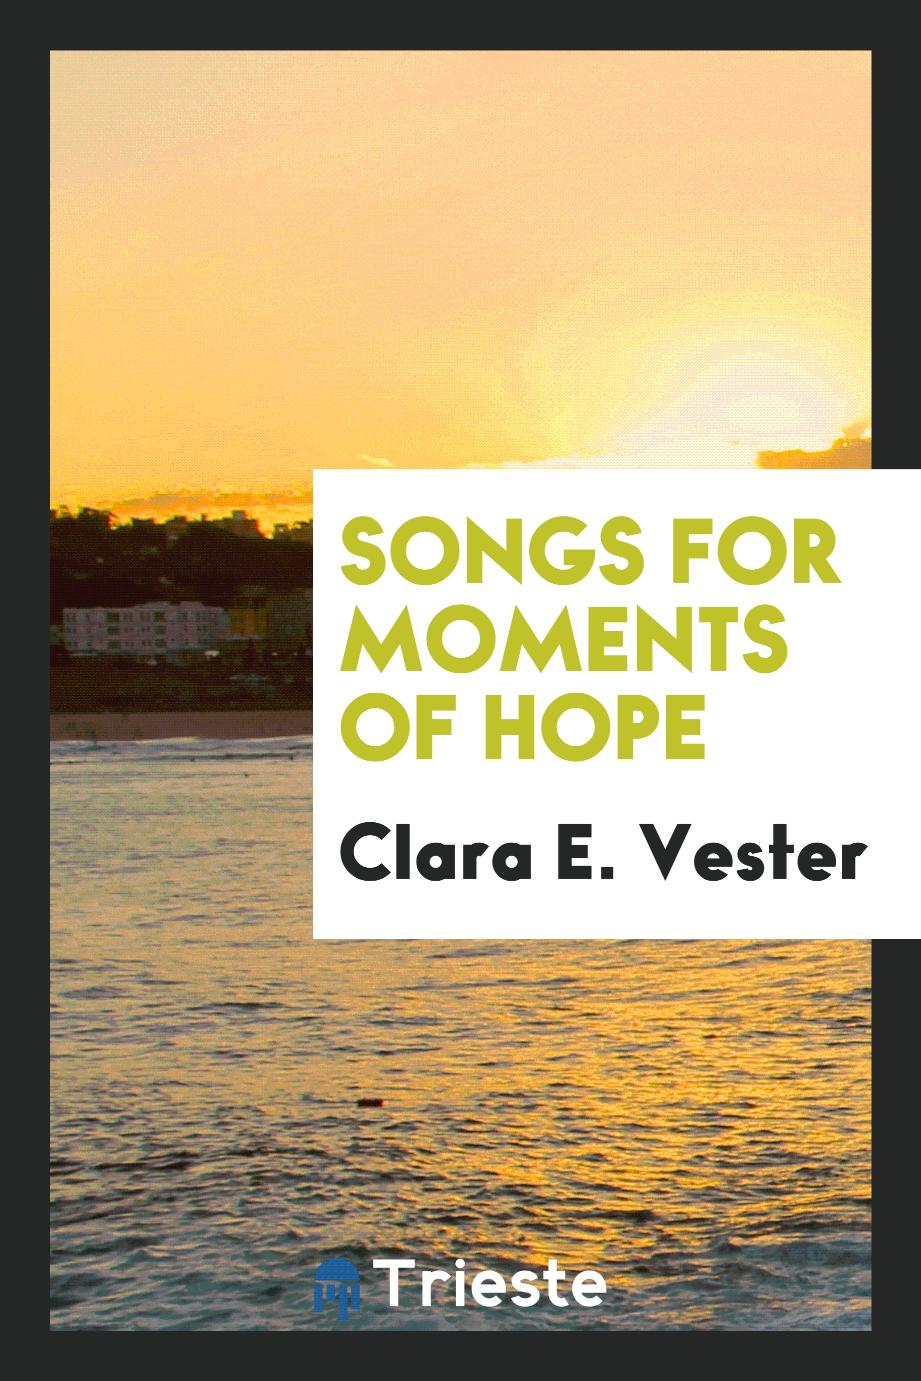 Songs for Moments of Hope